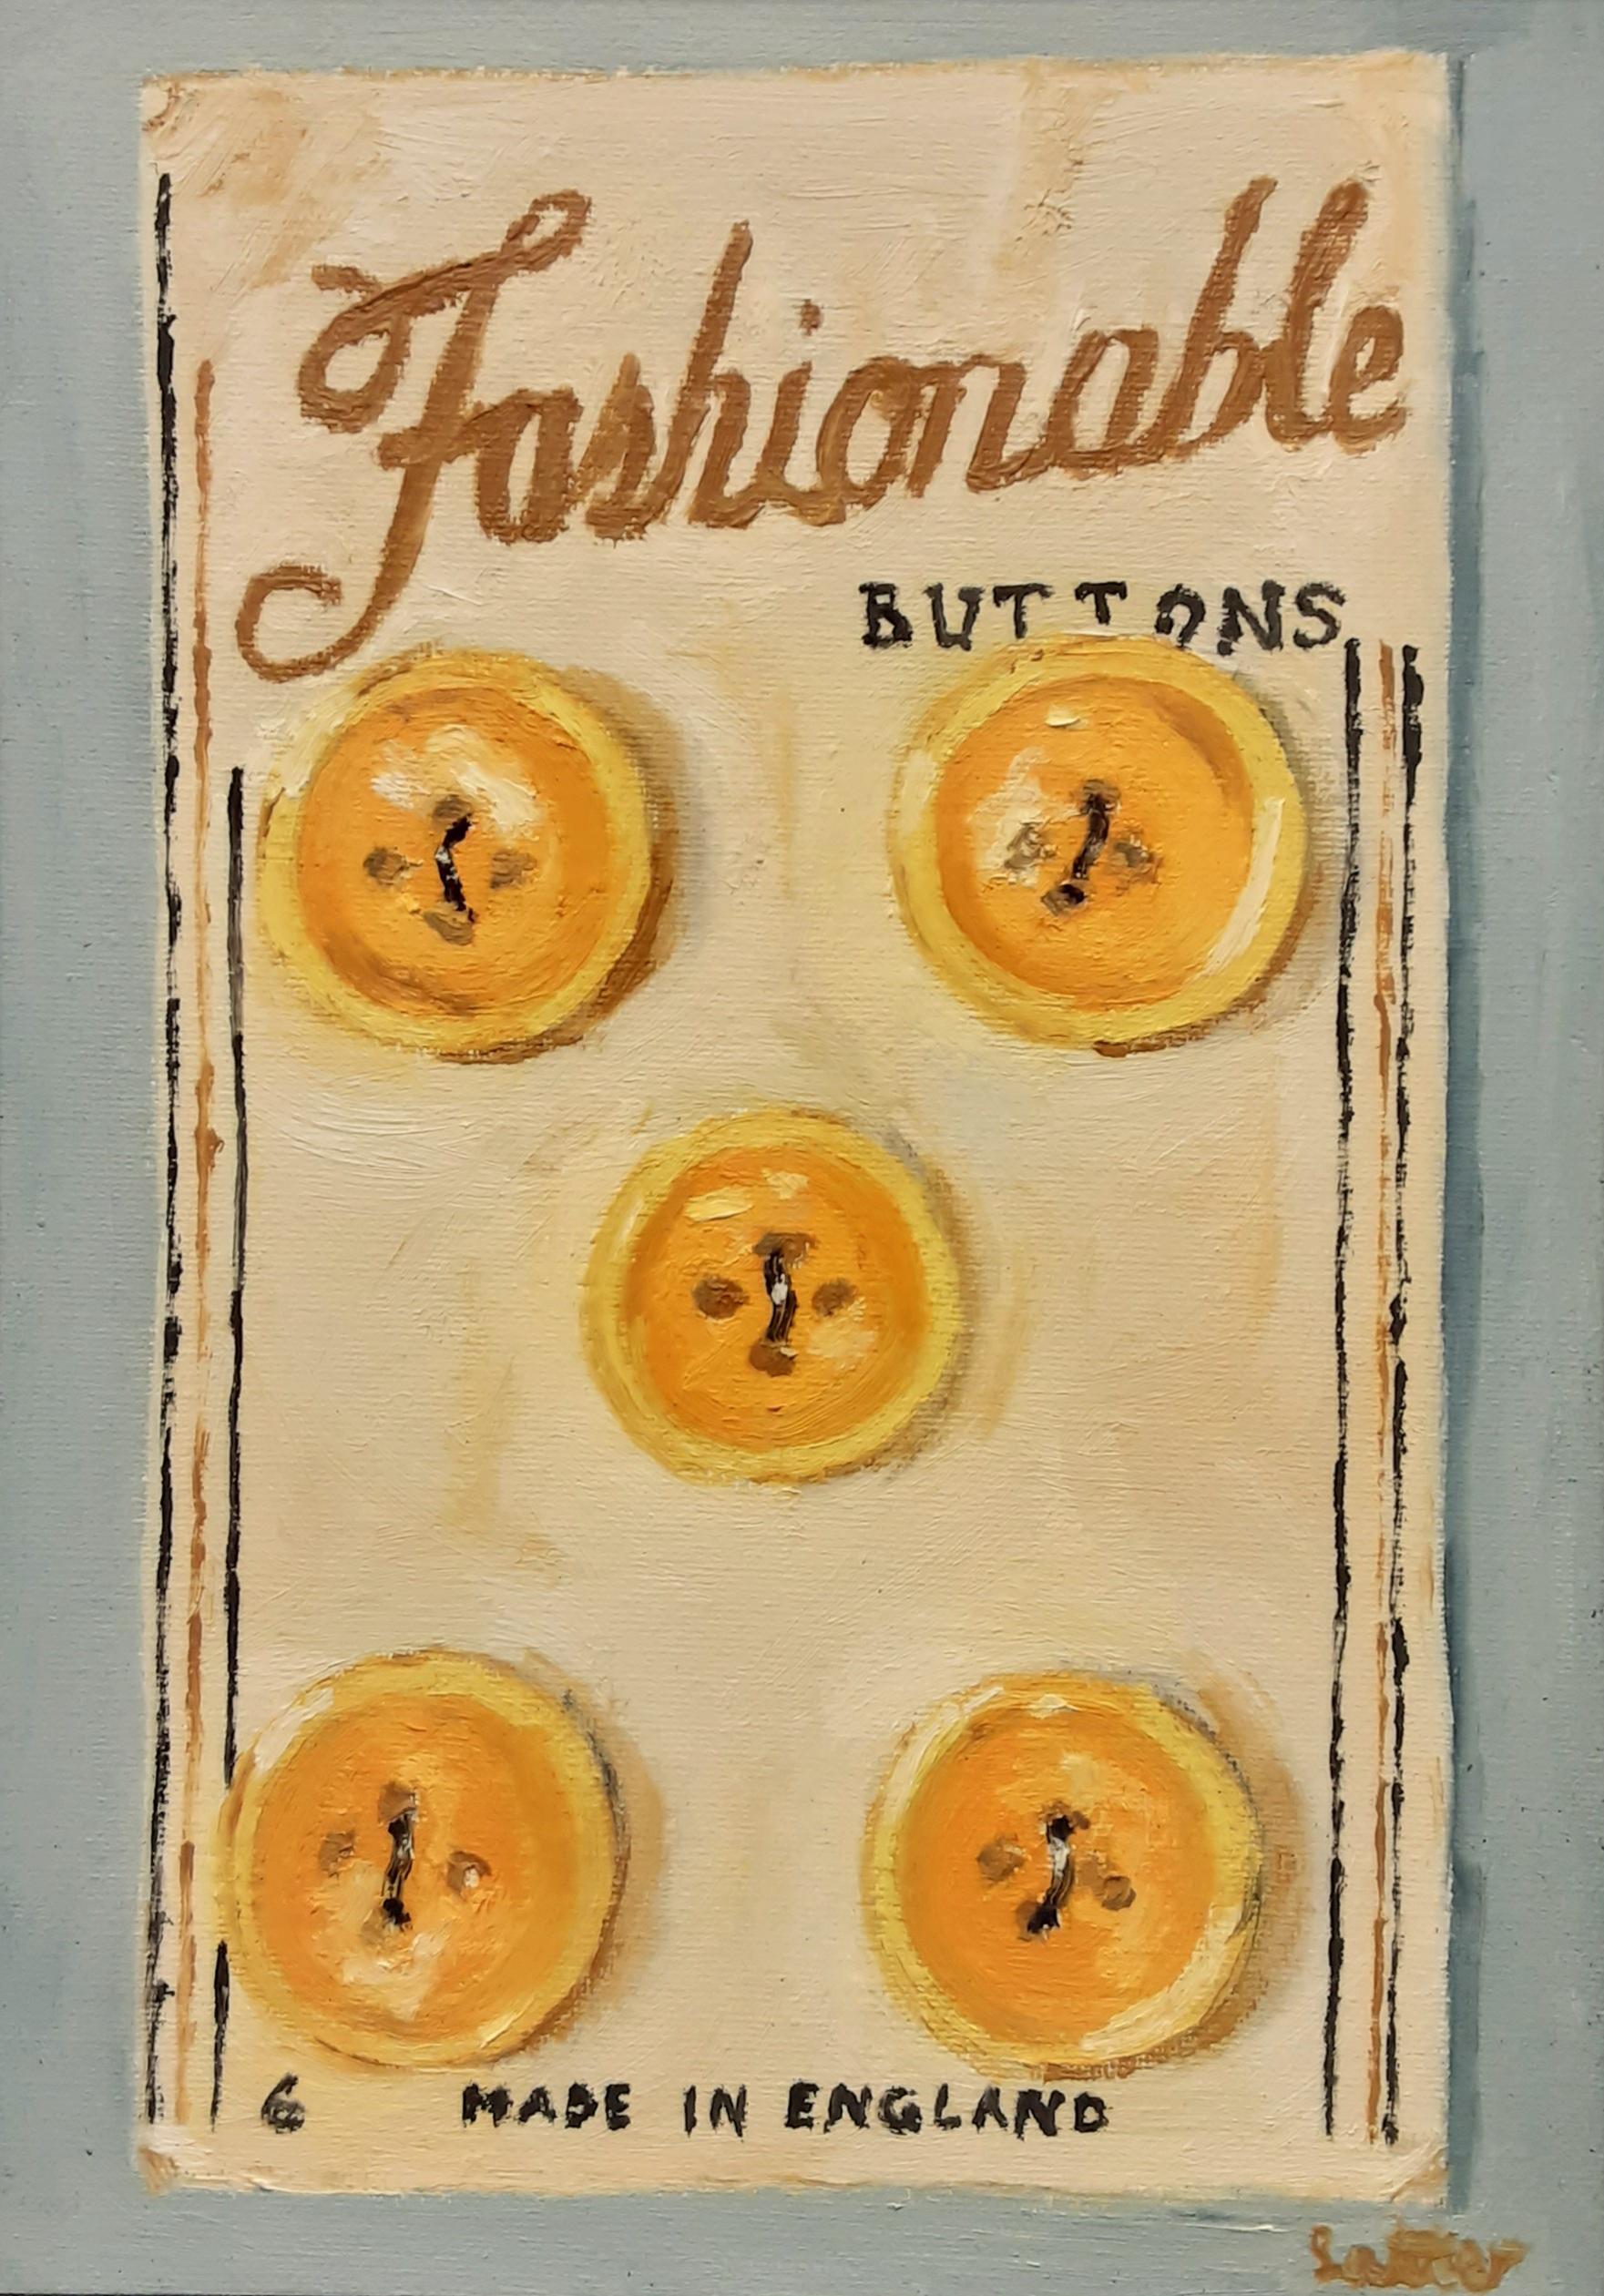 Alan Latter (born 1961)
Fashionable Buttons, a Trompe l'oeil
Signed and dated ‘2021’ verso
Oil on board
10½ x 7½ inches
11 x 7¾ inches

Born in Islington in 1961, Alan Latter's work is influenced by Bloomsbury Group artists Vanessa Bell and Duncan